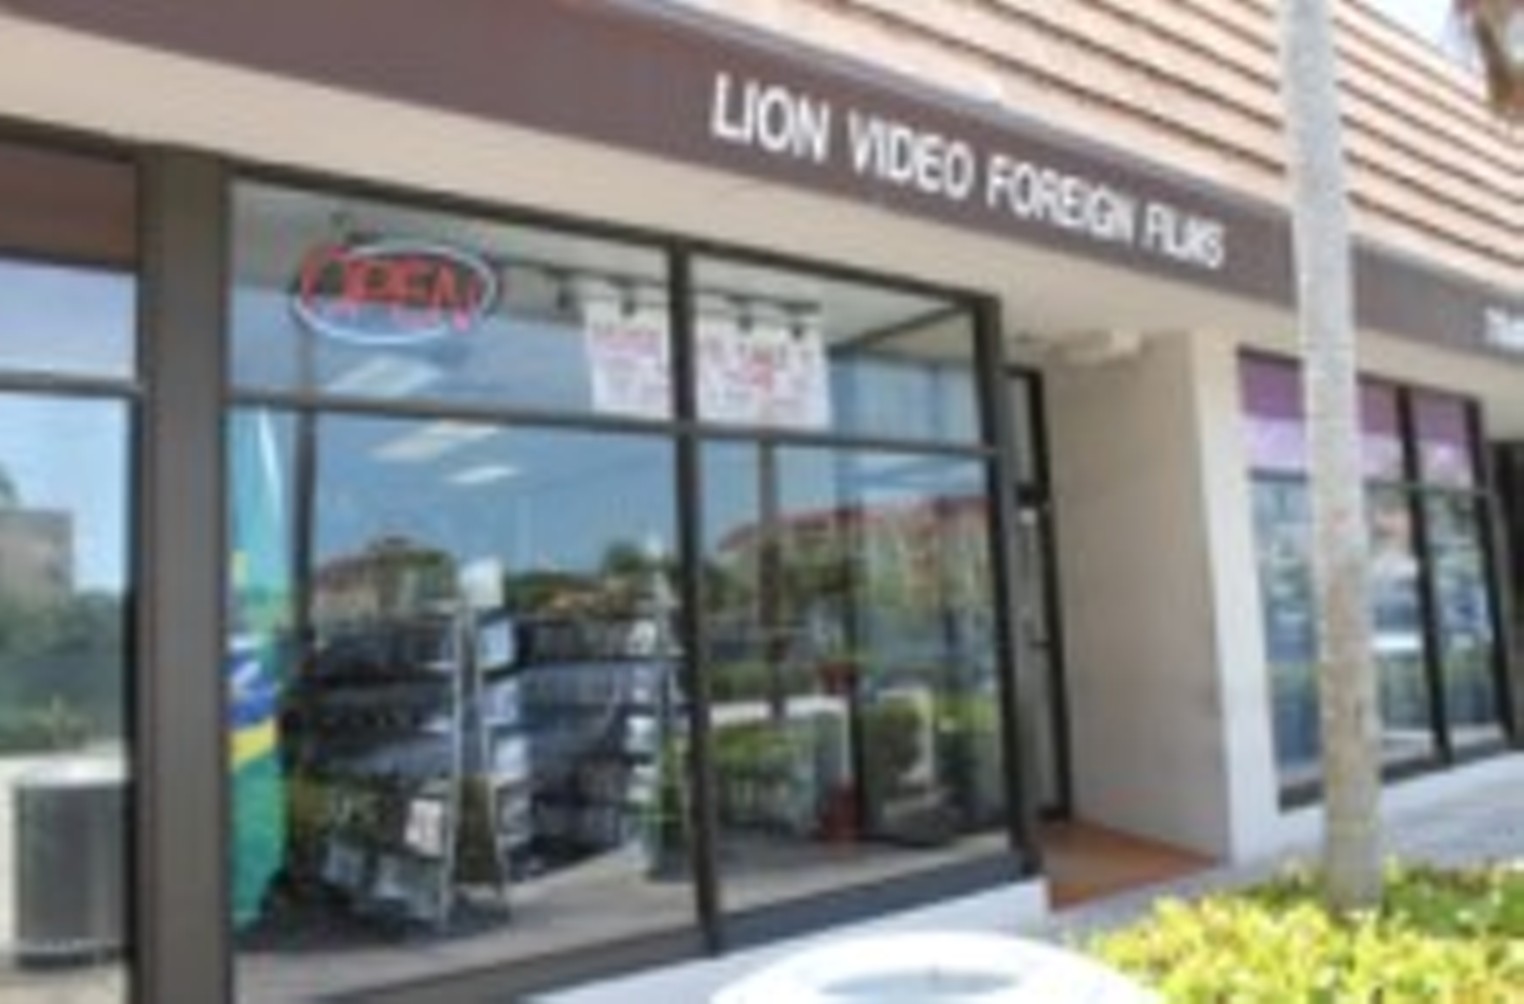 Best Video Store 2000 Lion Video Best Restaurants, Bars, Clubs, Music and Stores in Miami Miami New Times image